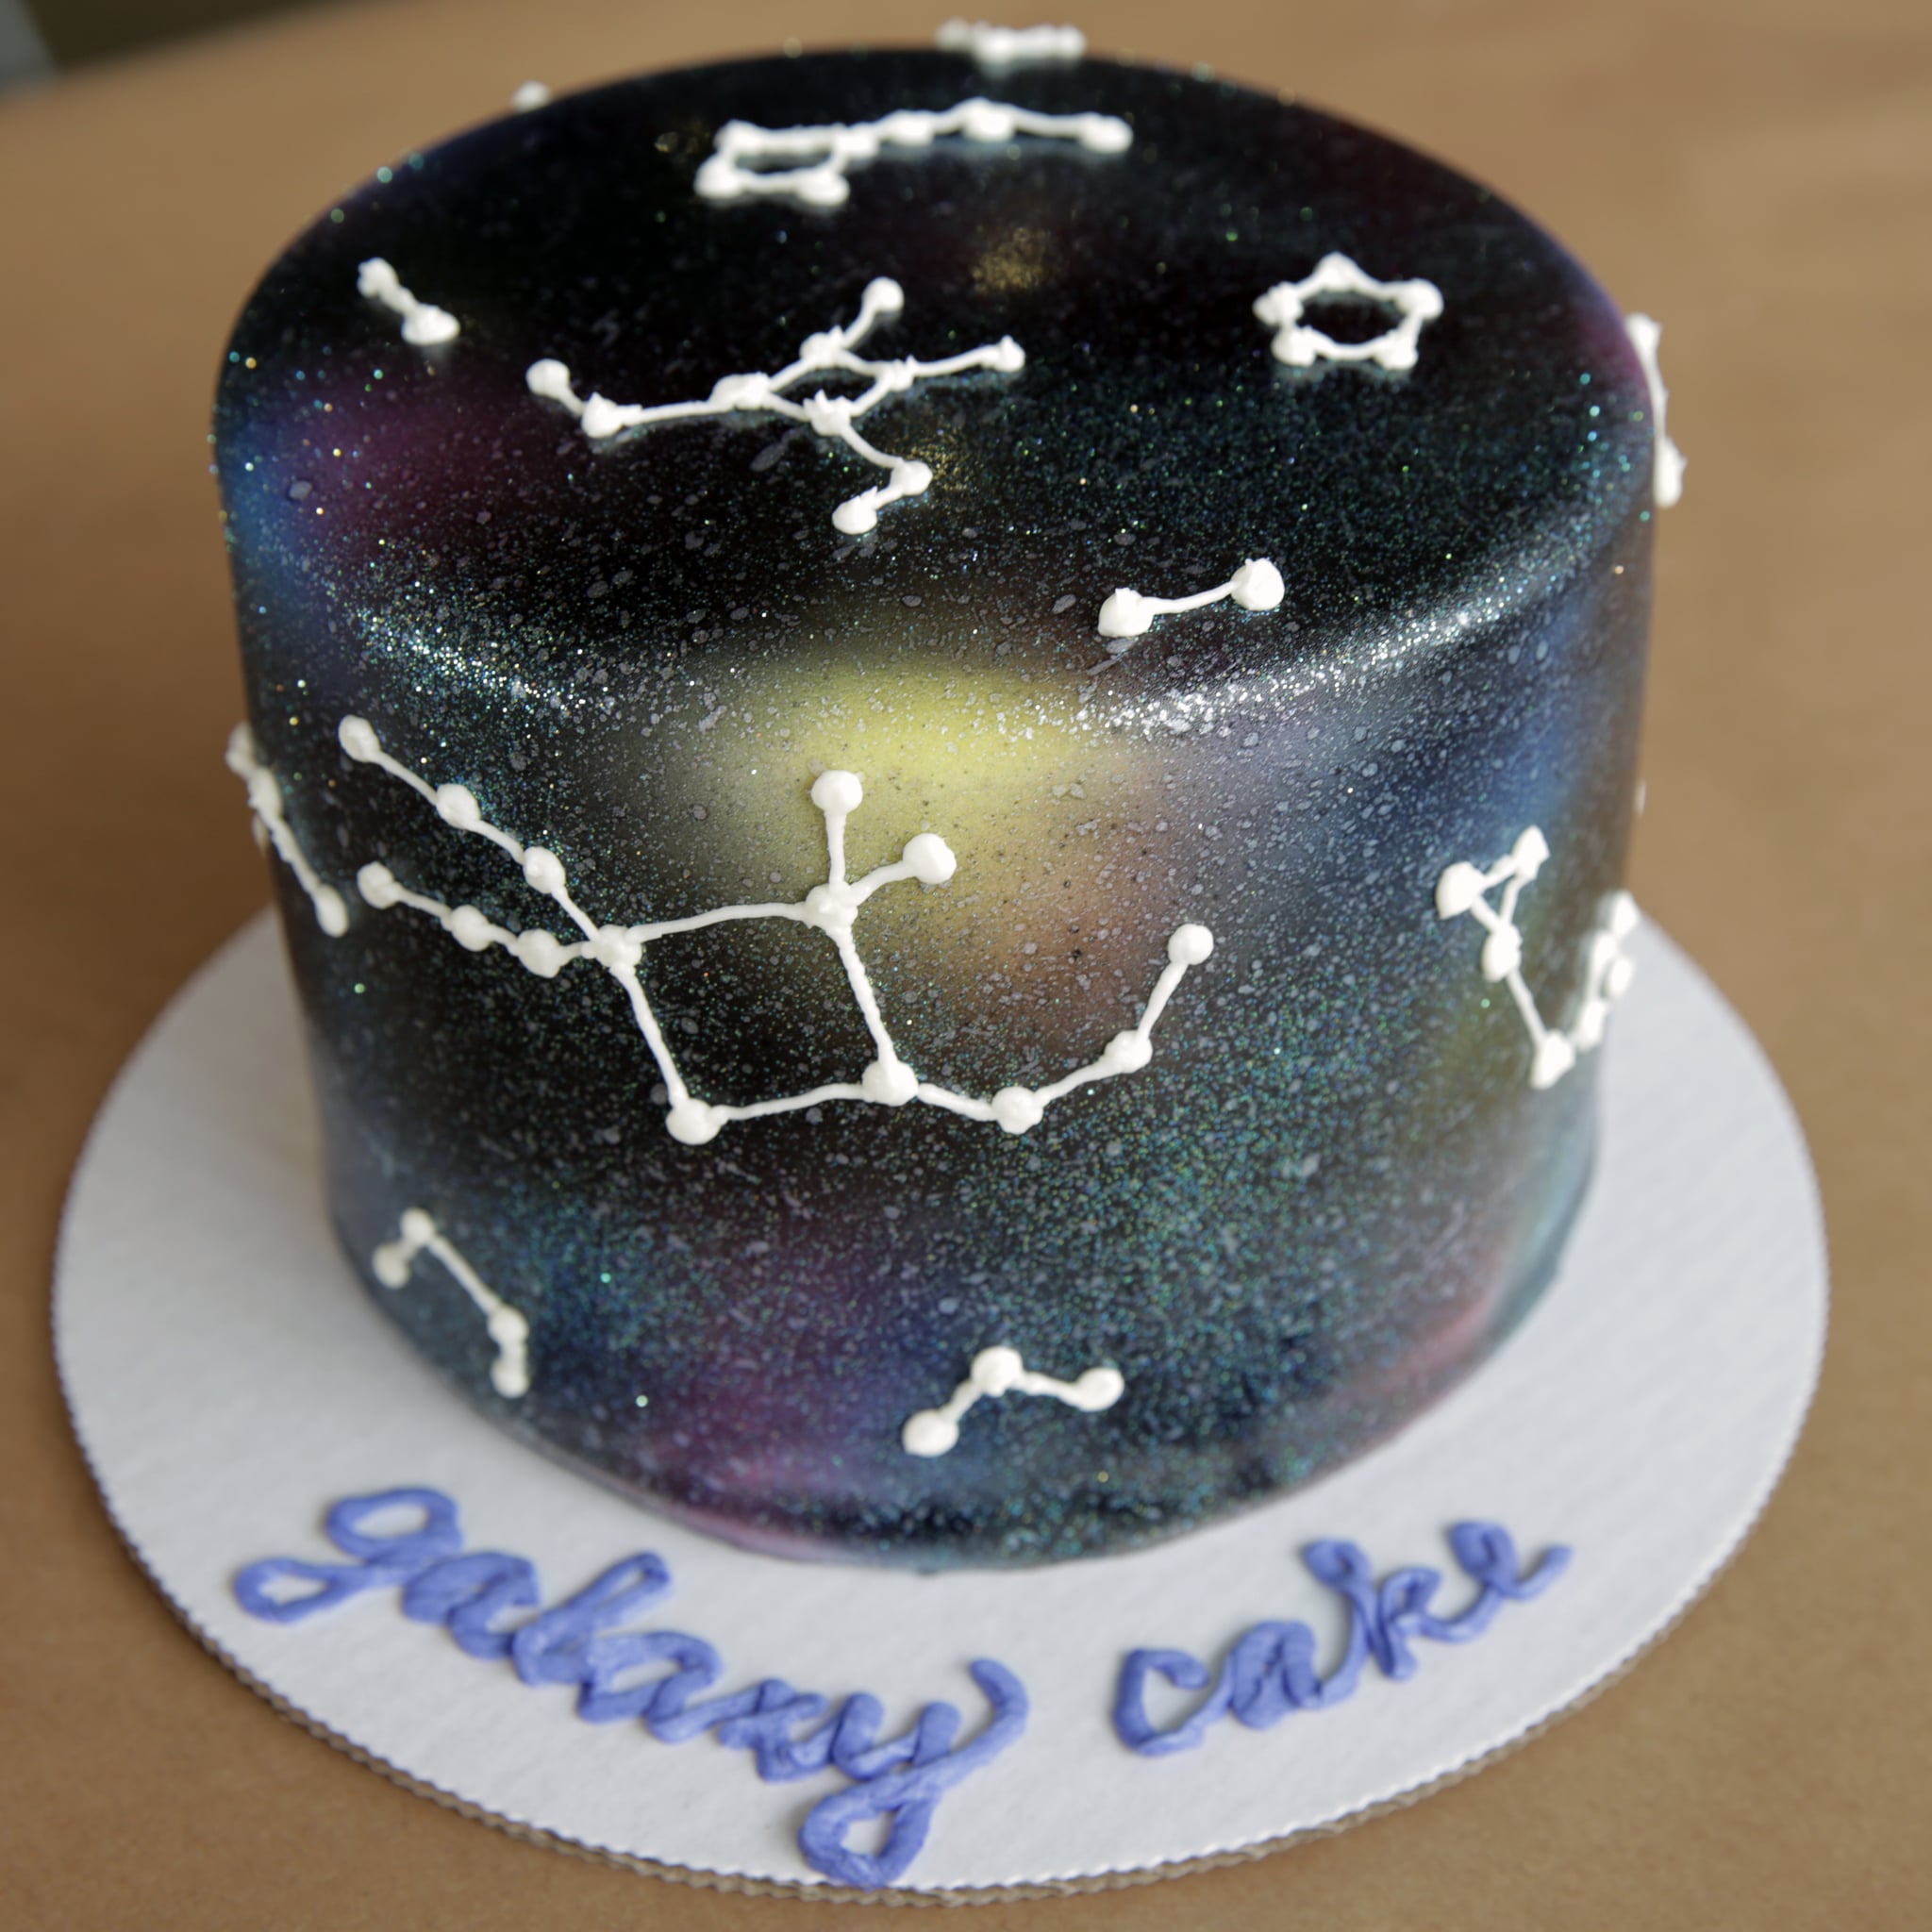 Galaxy Cakes Are The Out-Of-This-World Dessert Your Next Dinner Party  Should Have